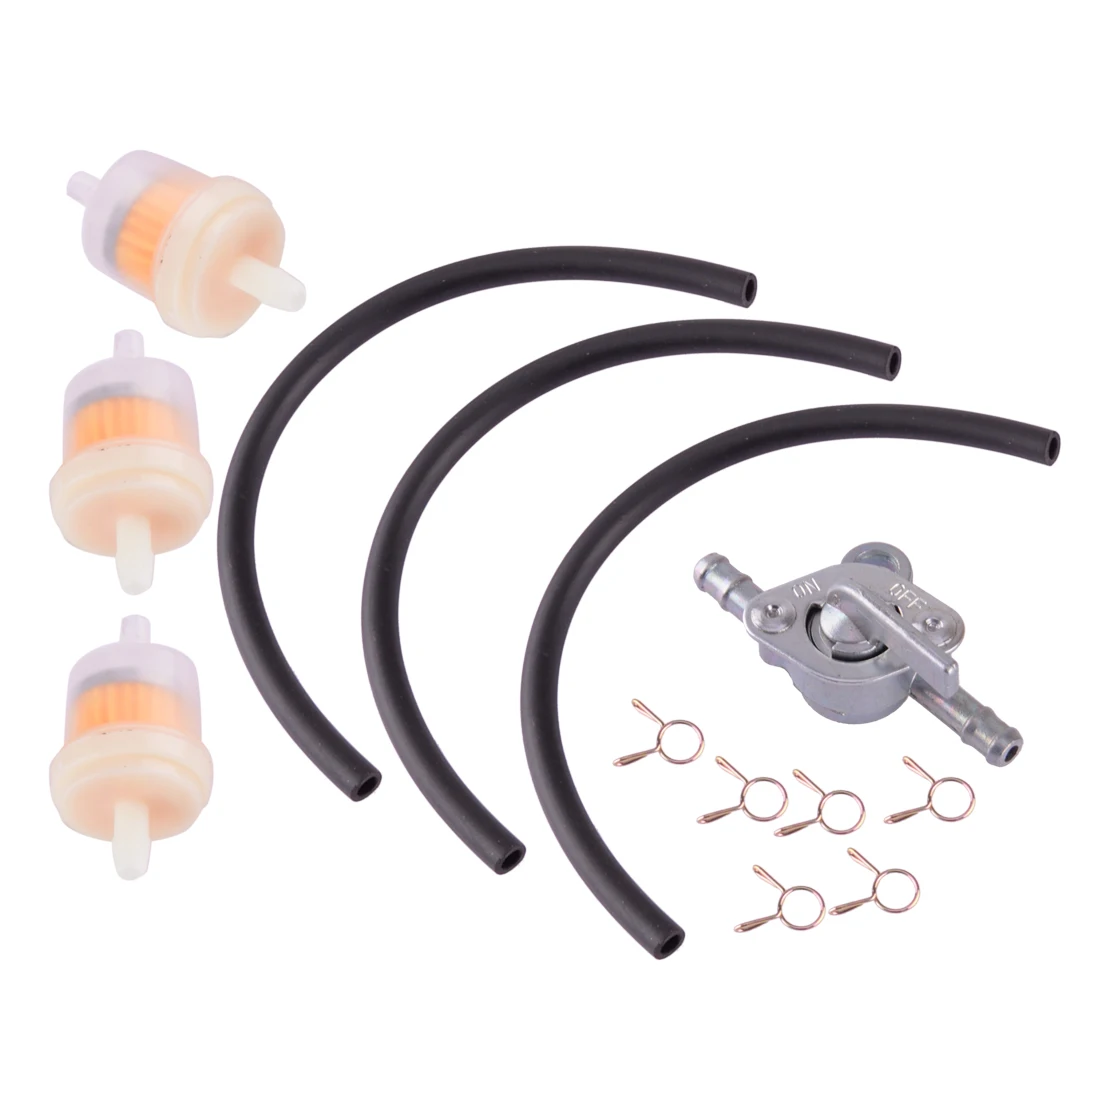 

Universal 5-6mm Diameter Gasoline Tap Filter Kit With Hose Clamp Fit For Moped Quad ATV Lawn Mower Trimmer